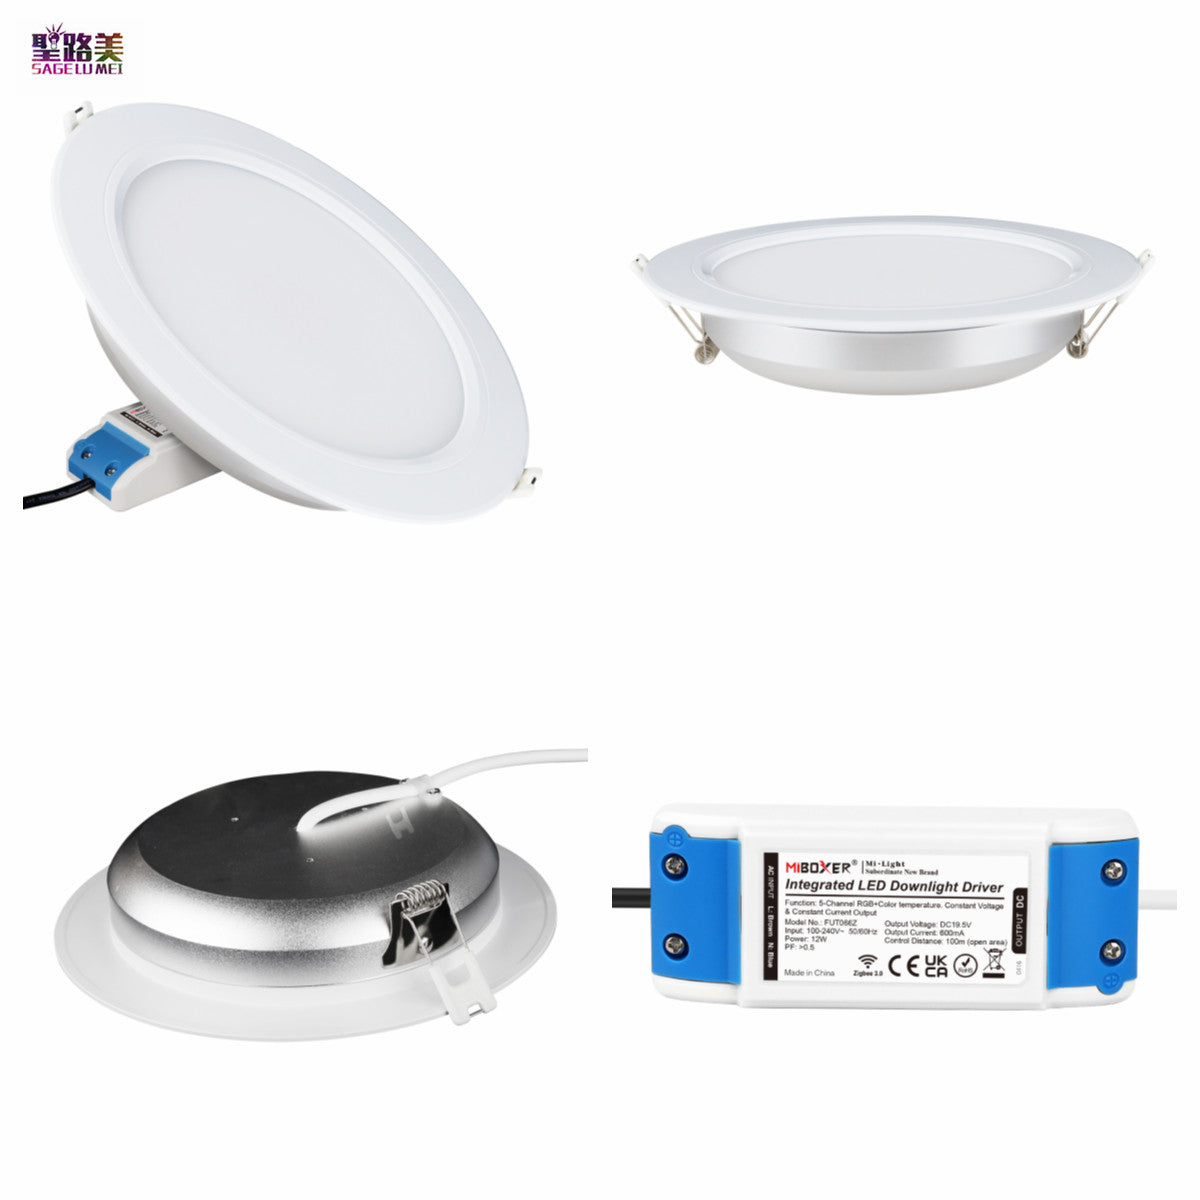 LED Downlight Zigbee 3.0 Lights Ceiling Lamp For Living Room AC110V-240V 12W RGB+CCT Bed Dining Room Decorate